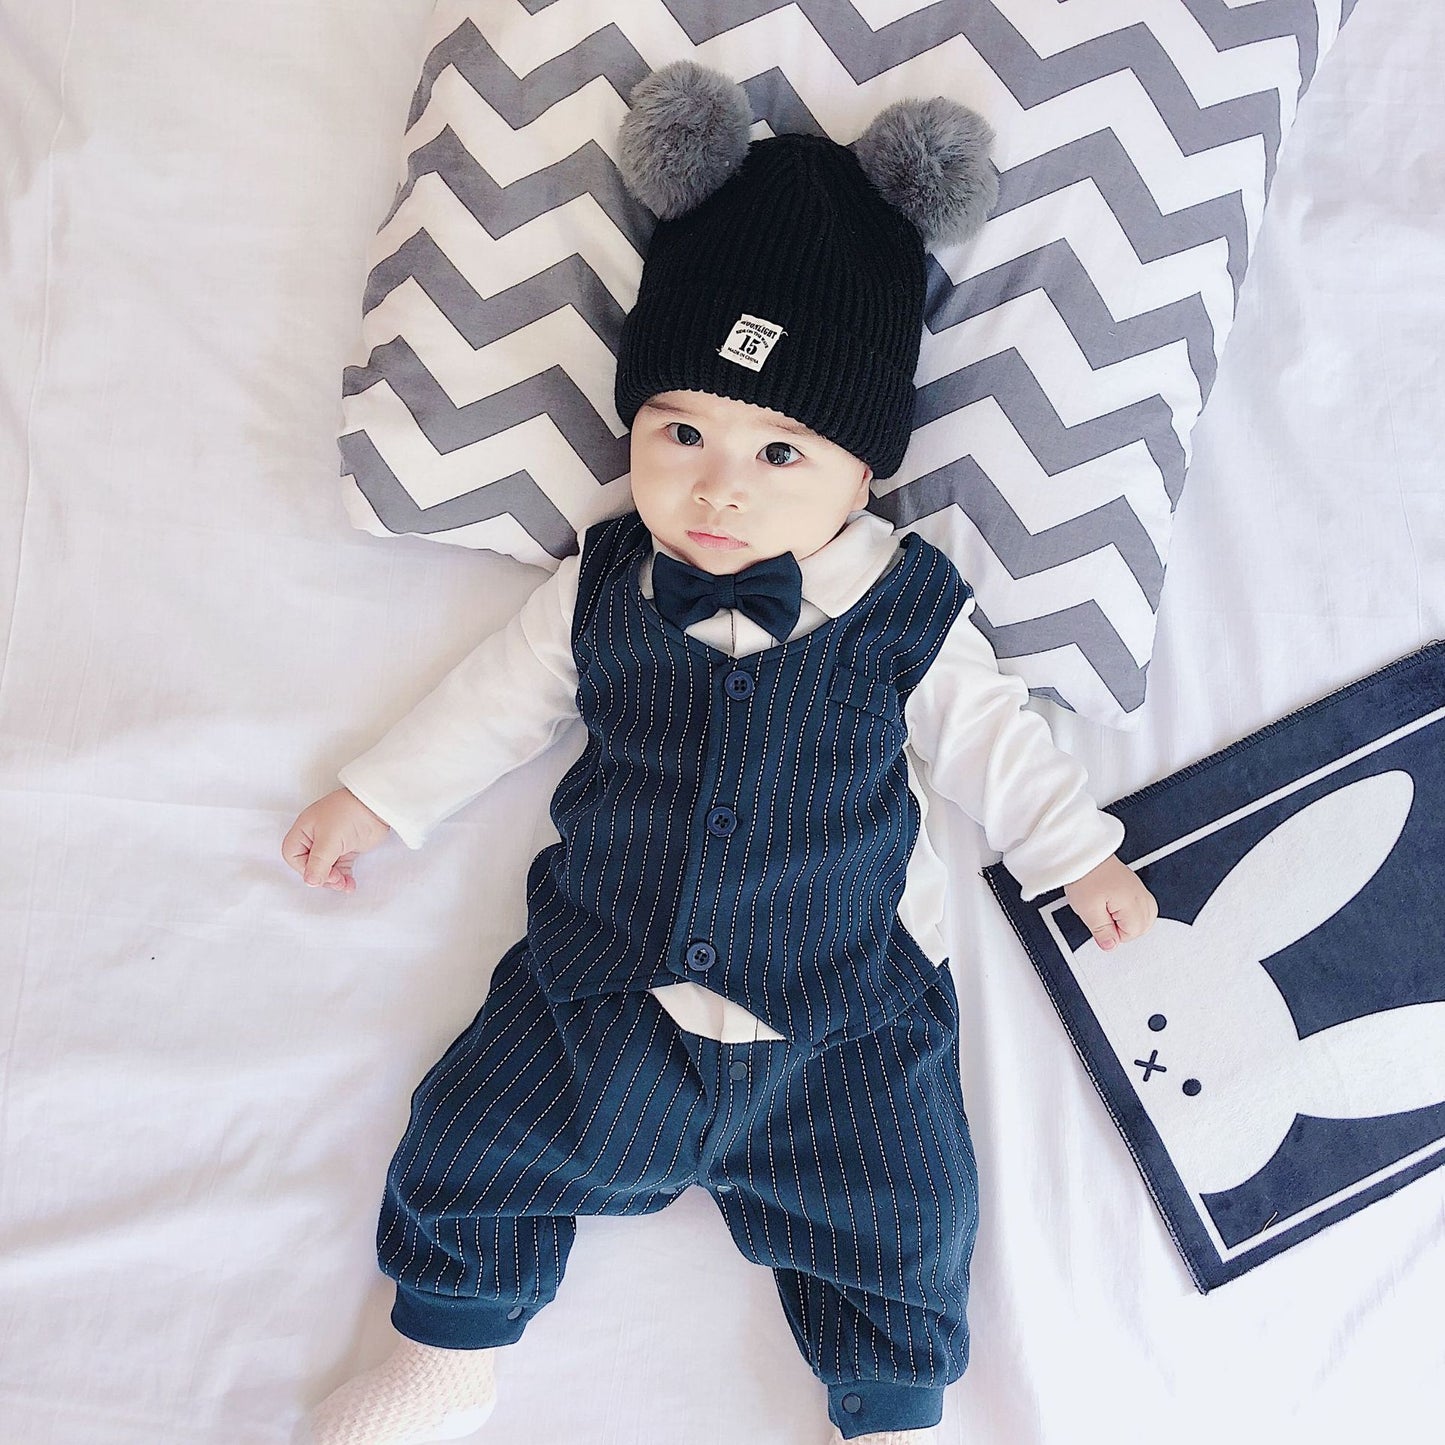 Cotton Newborn Baby Long Sleeve Romper Jumpsuits Outfits Boy Toddler  Handsome Gentleman Suit Clothes 0-12M